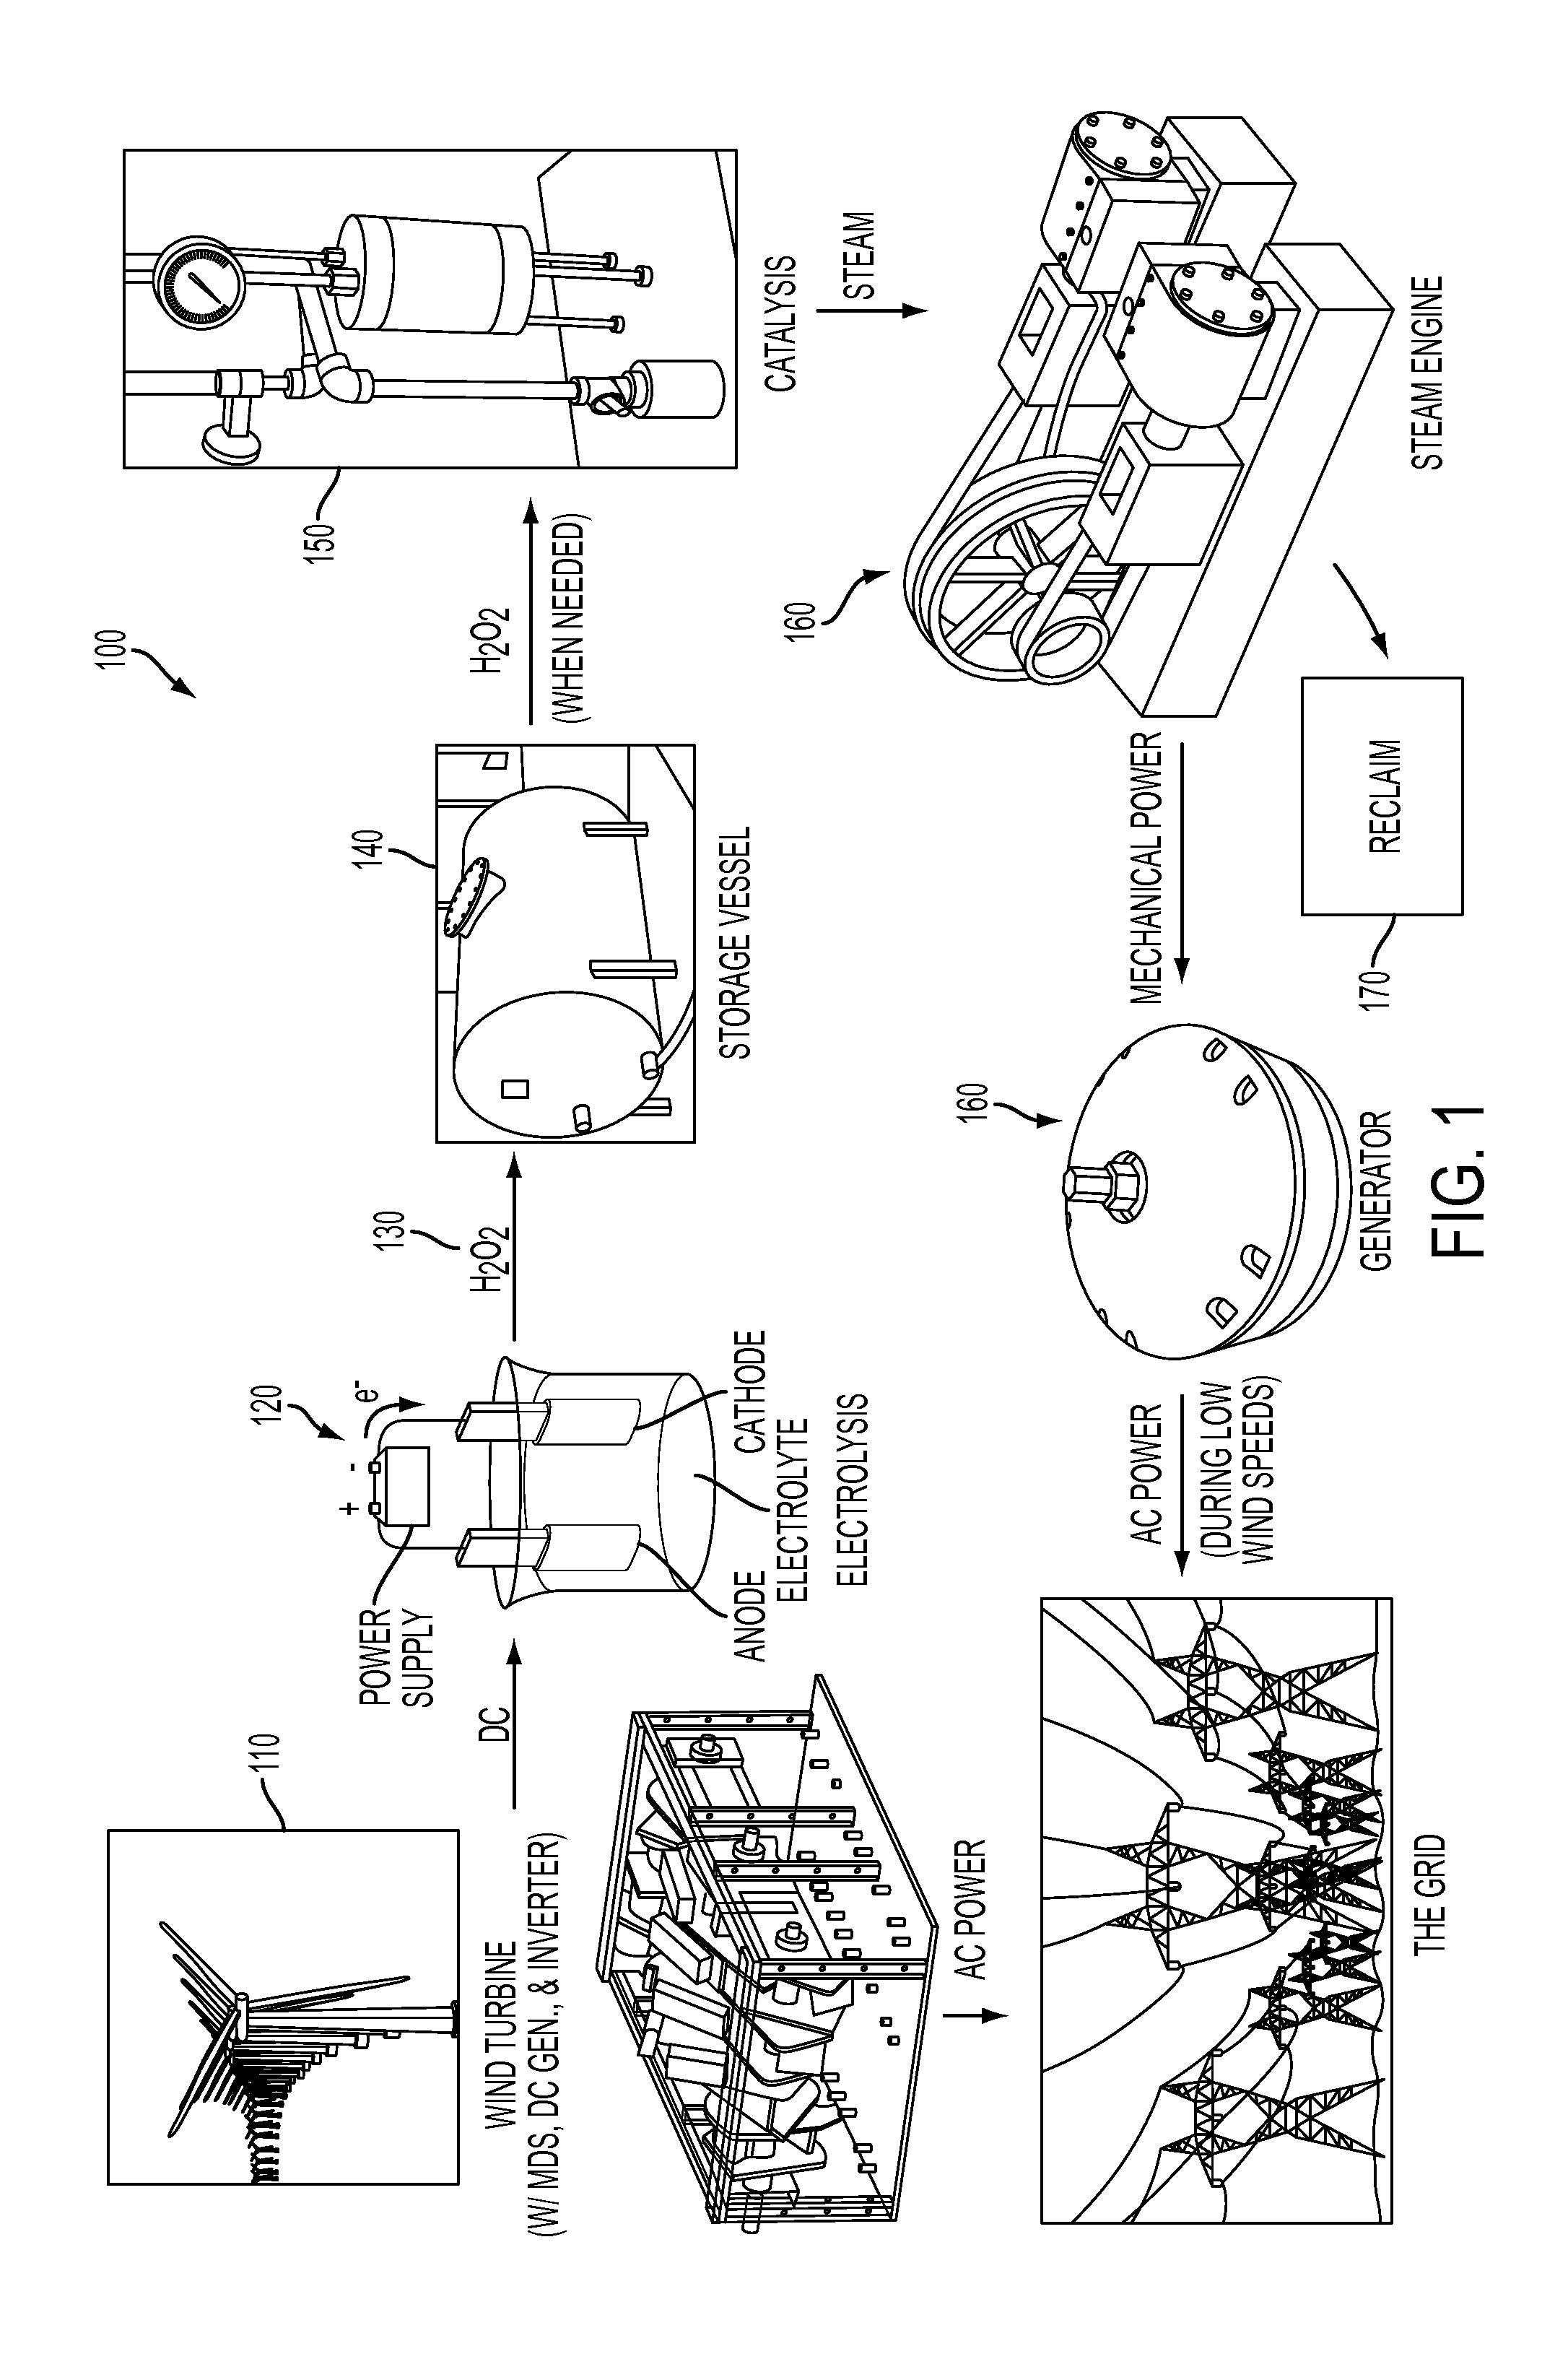 System and method for storing energy and/or generating efficient energy